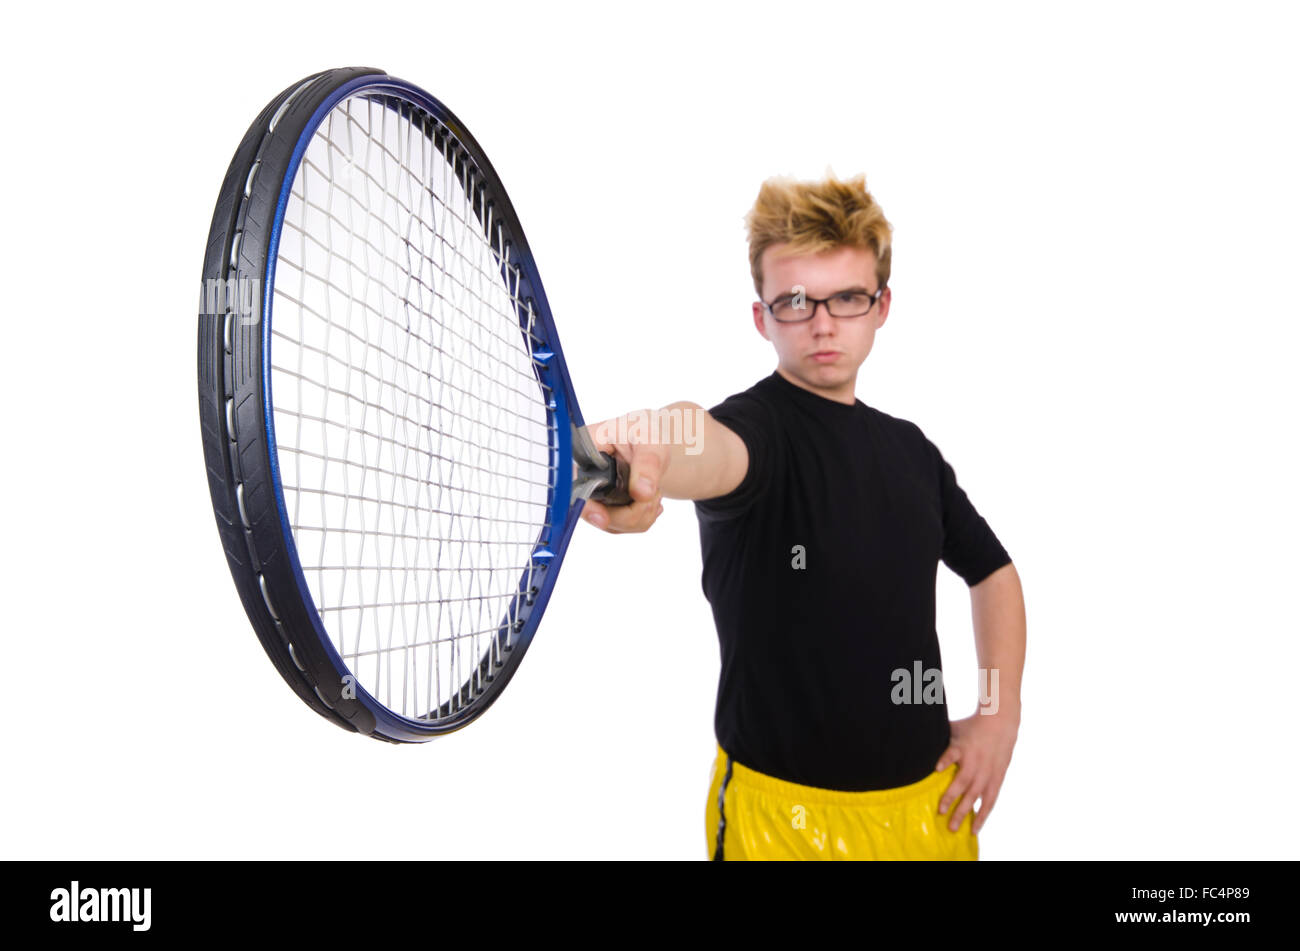 Funny tennis player isolated on white Stock Photo - Alamy